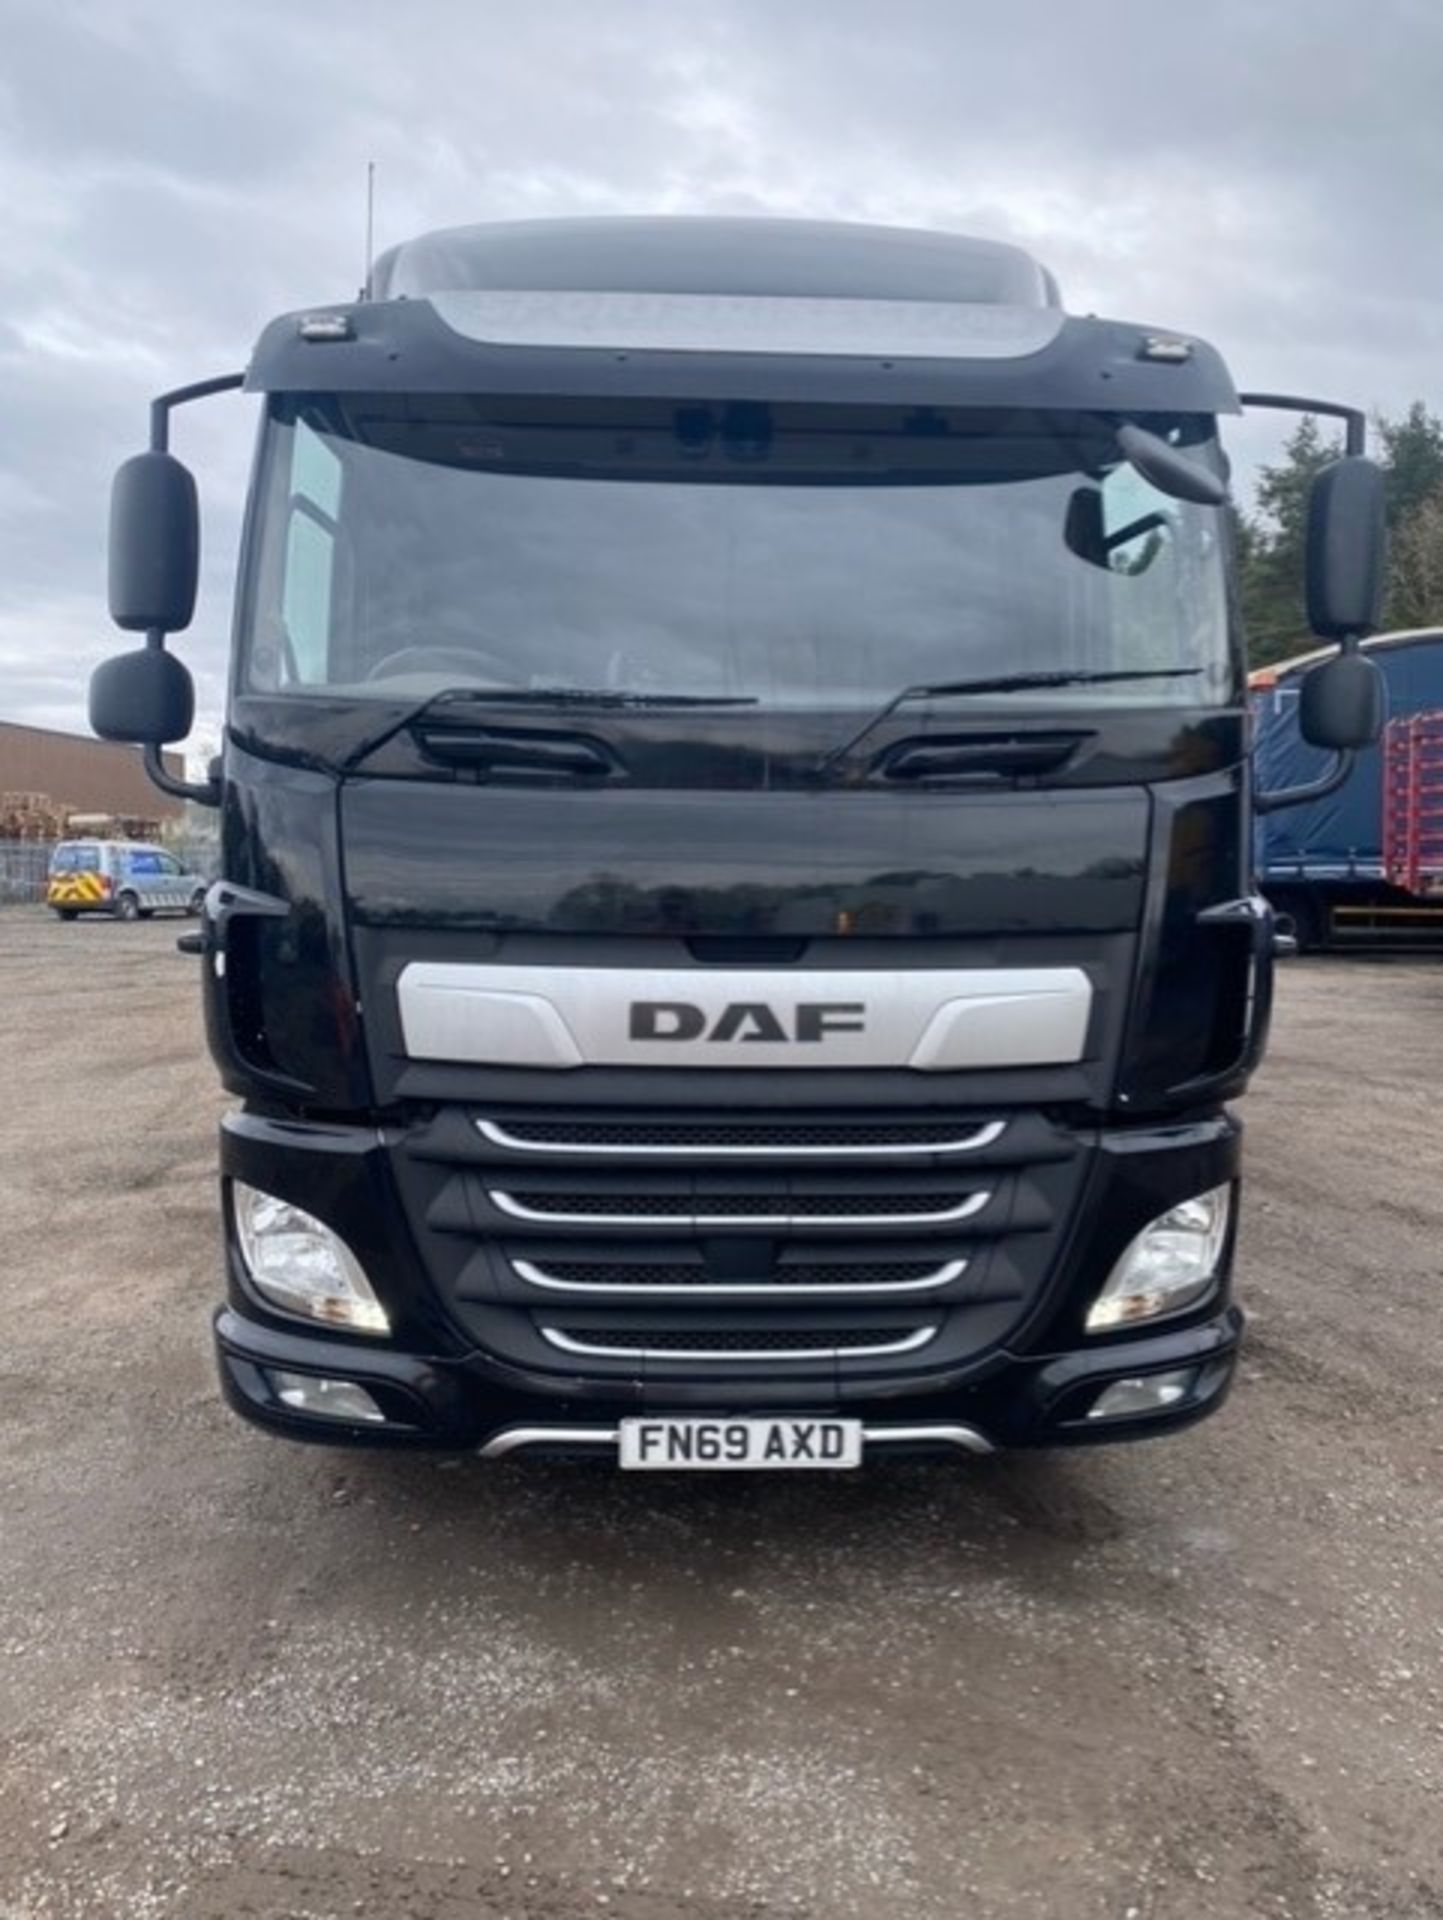 2019, DAF CF 260 FA (Ex-Fleet Owned & Maintained) - FN69 AXD (18 Ton Rigid Truck with Tail Lift) - Image 4 of 20